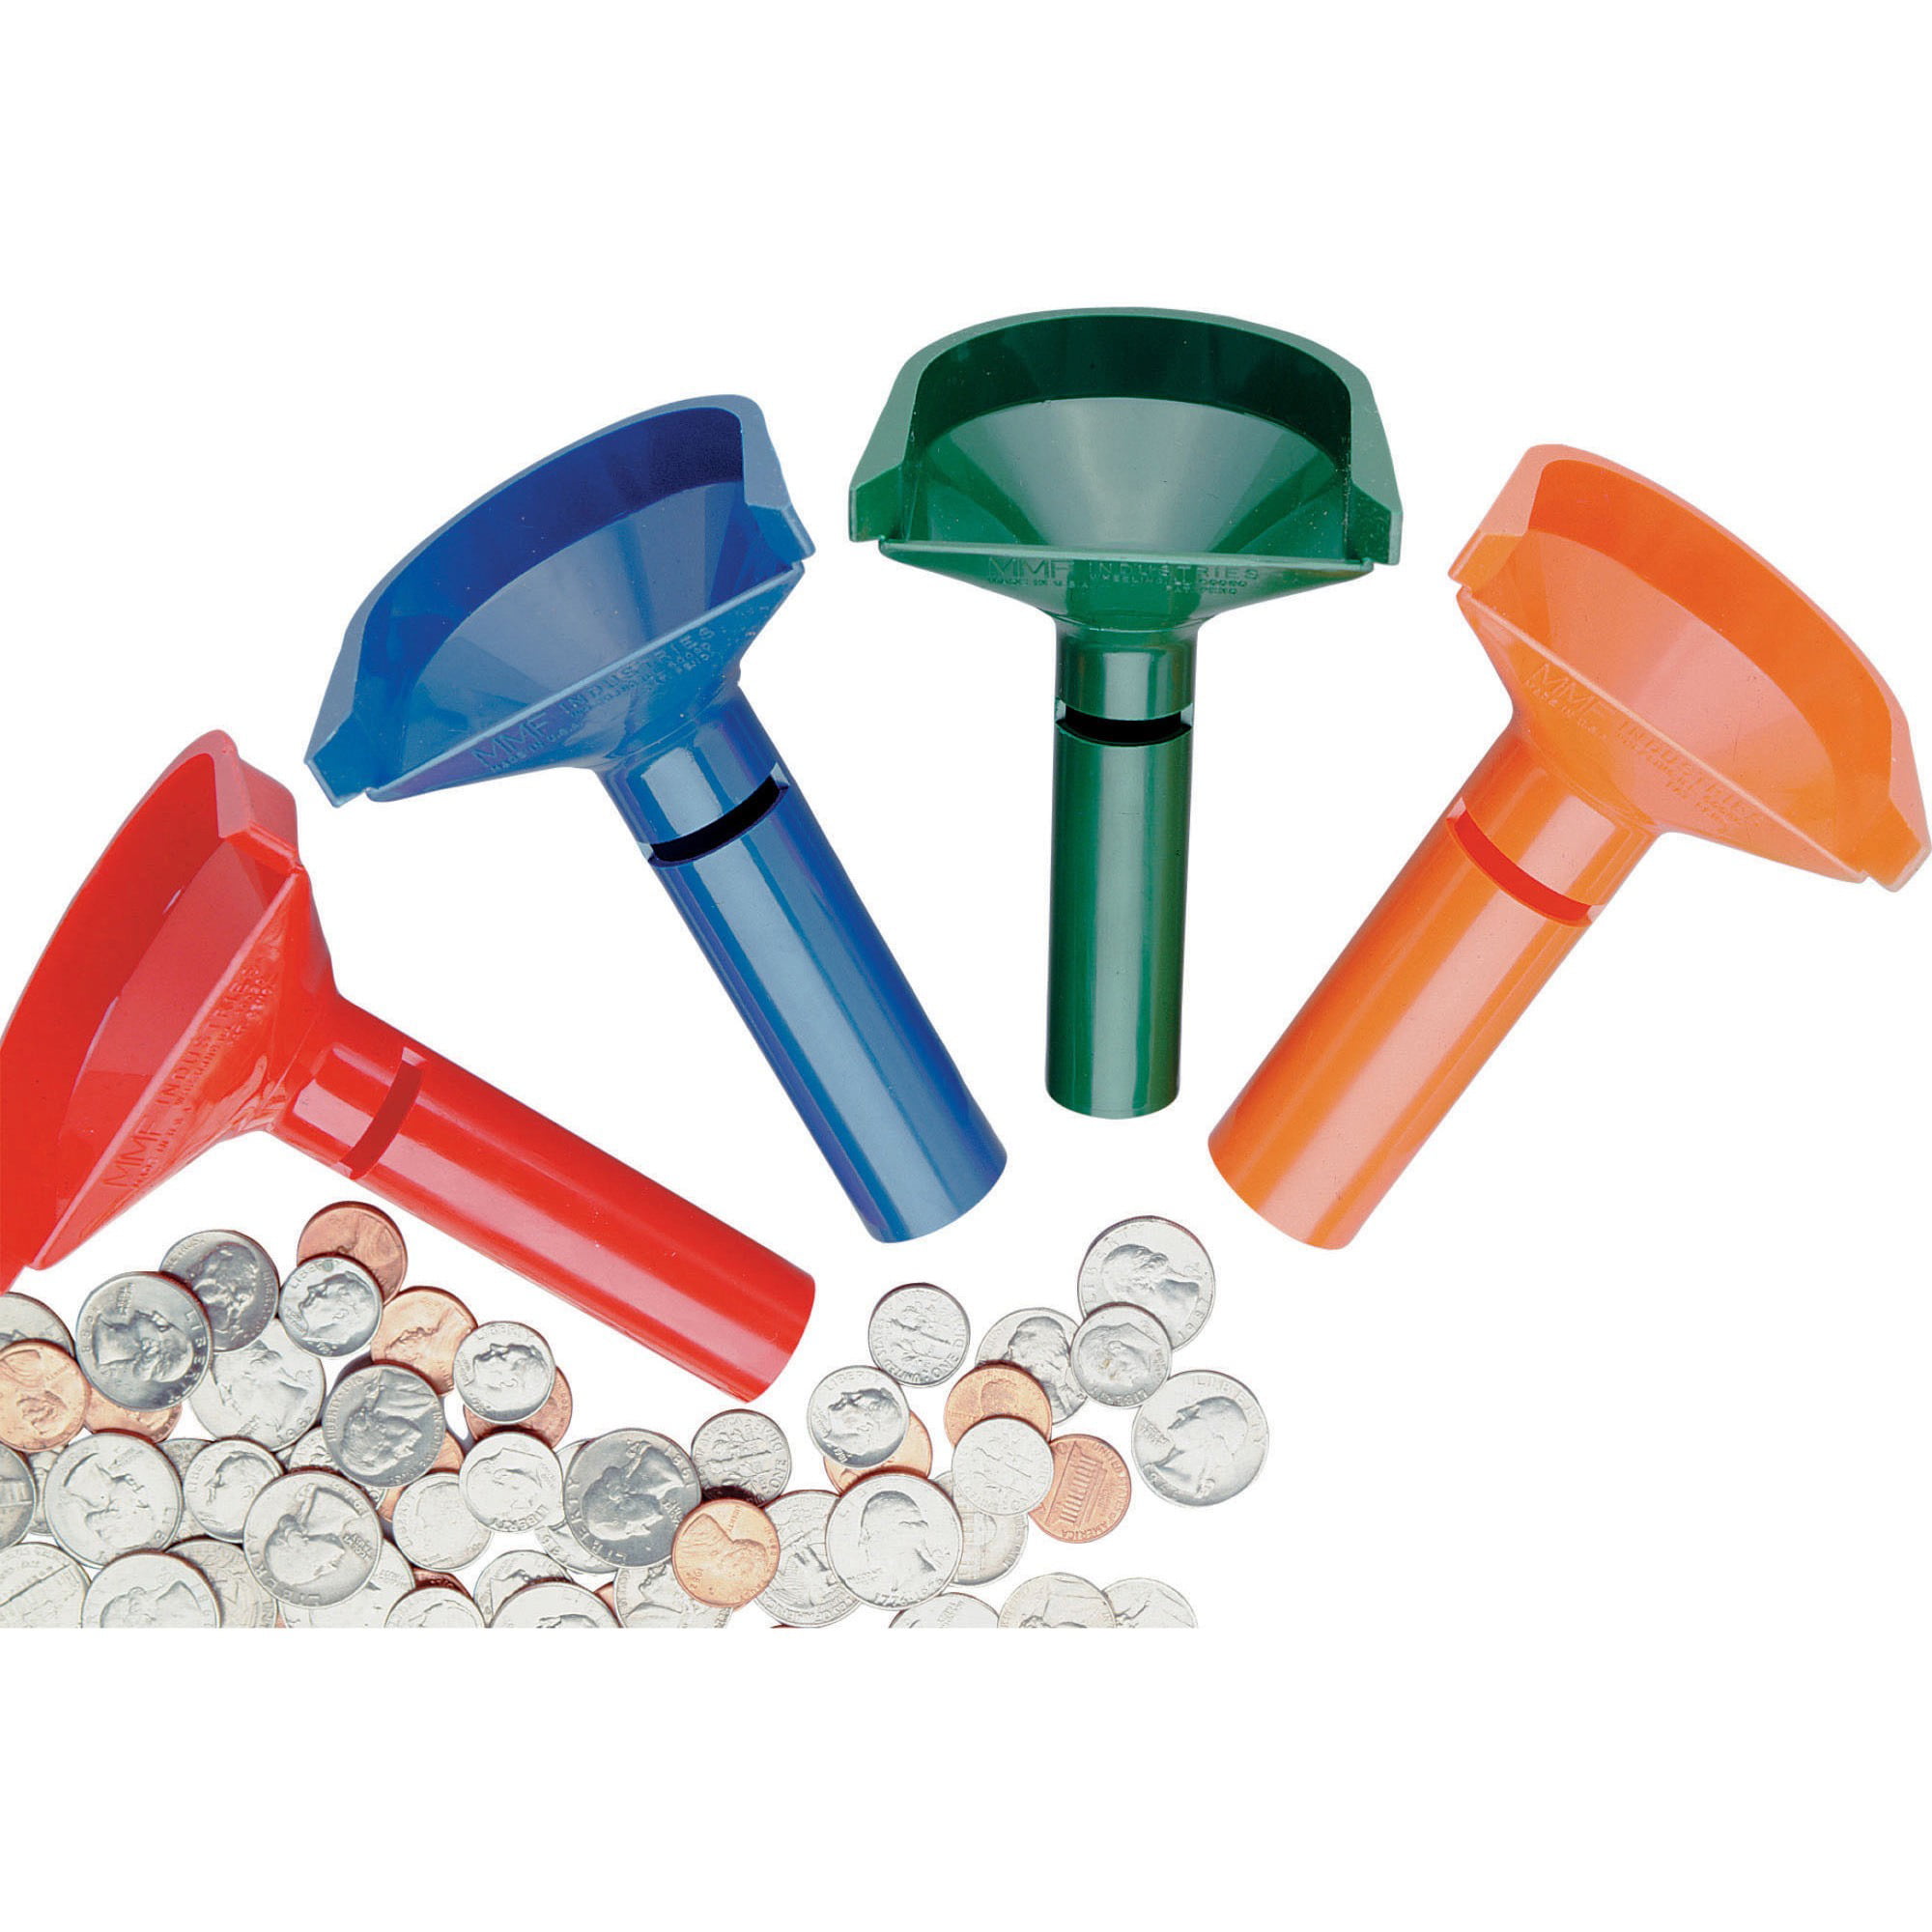 Dimes Quarters Half-Dollars and Dollar Coins into Tubes Orderly Nickels Coin Sorter Dispenser Counting Automatic Coin Tubes Functional Counter Machine Accurately Sort Pennies 